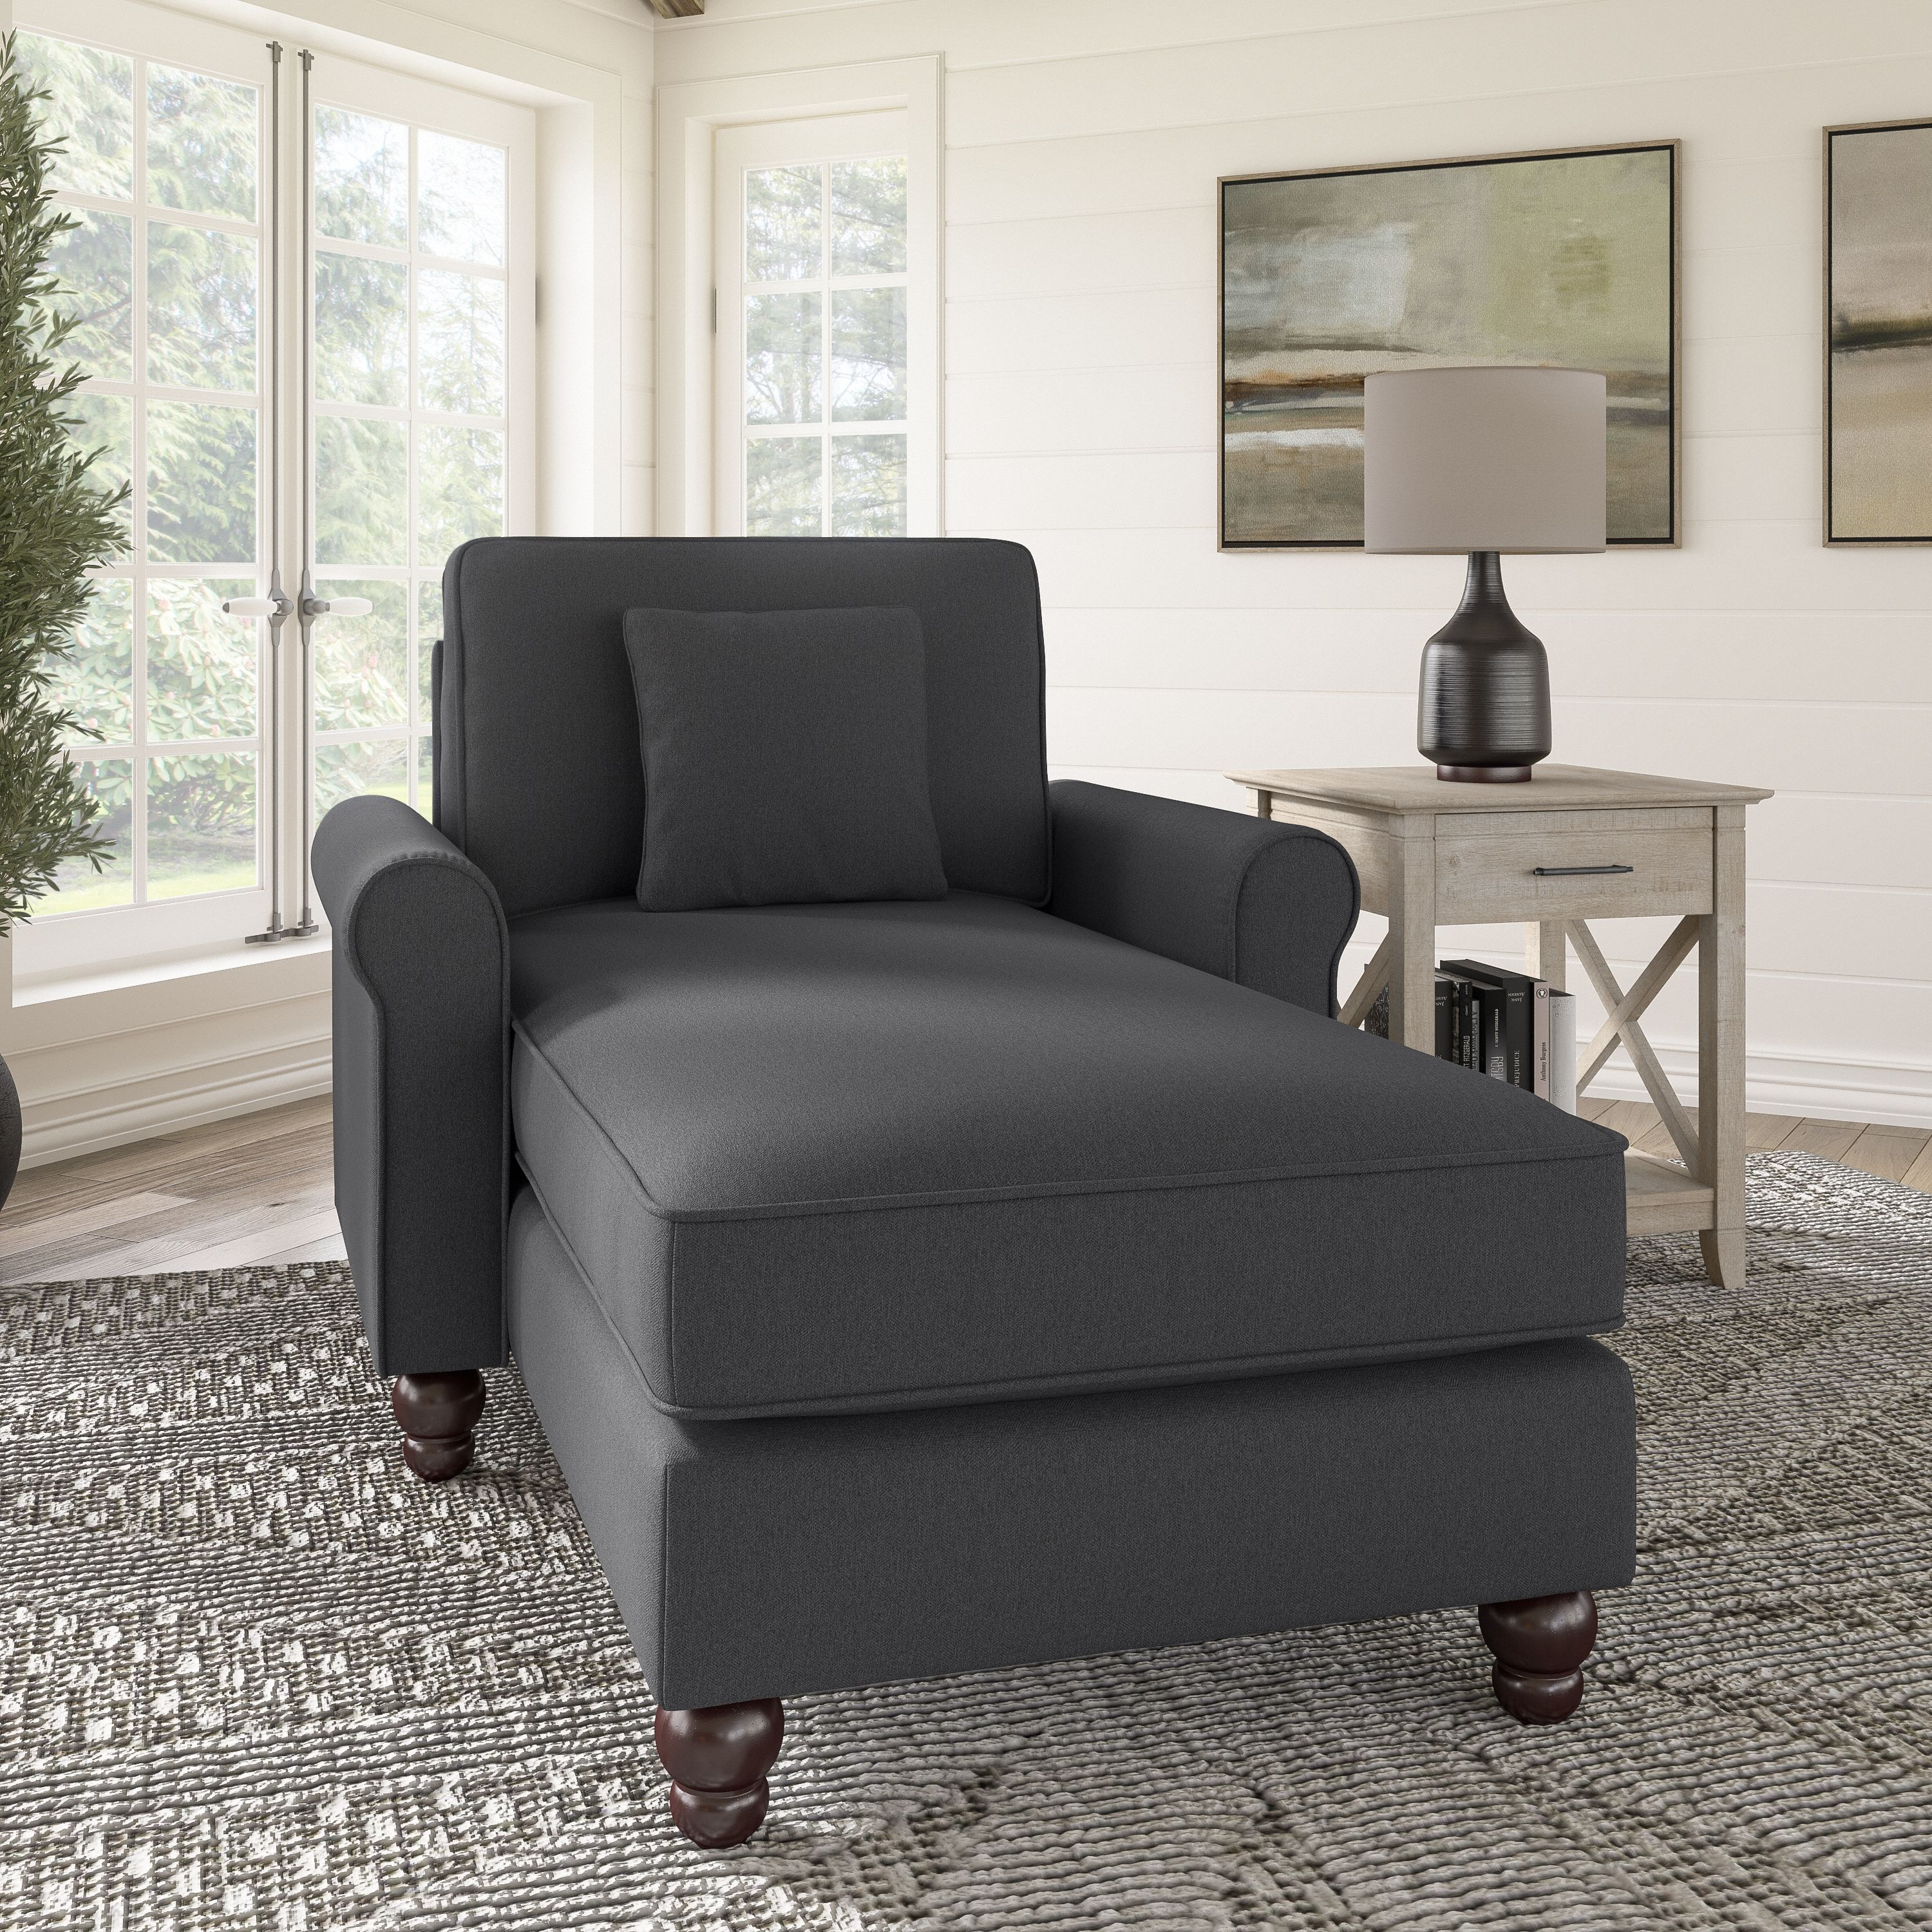 Shop Bush Furniture Hudson Chaise Lounge with Arms 01 HDM41BCGH-03K #color_charcoal gray herringbone fabr